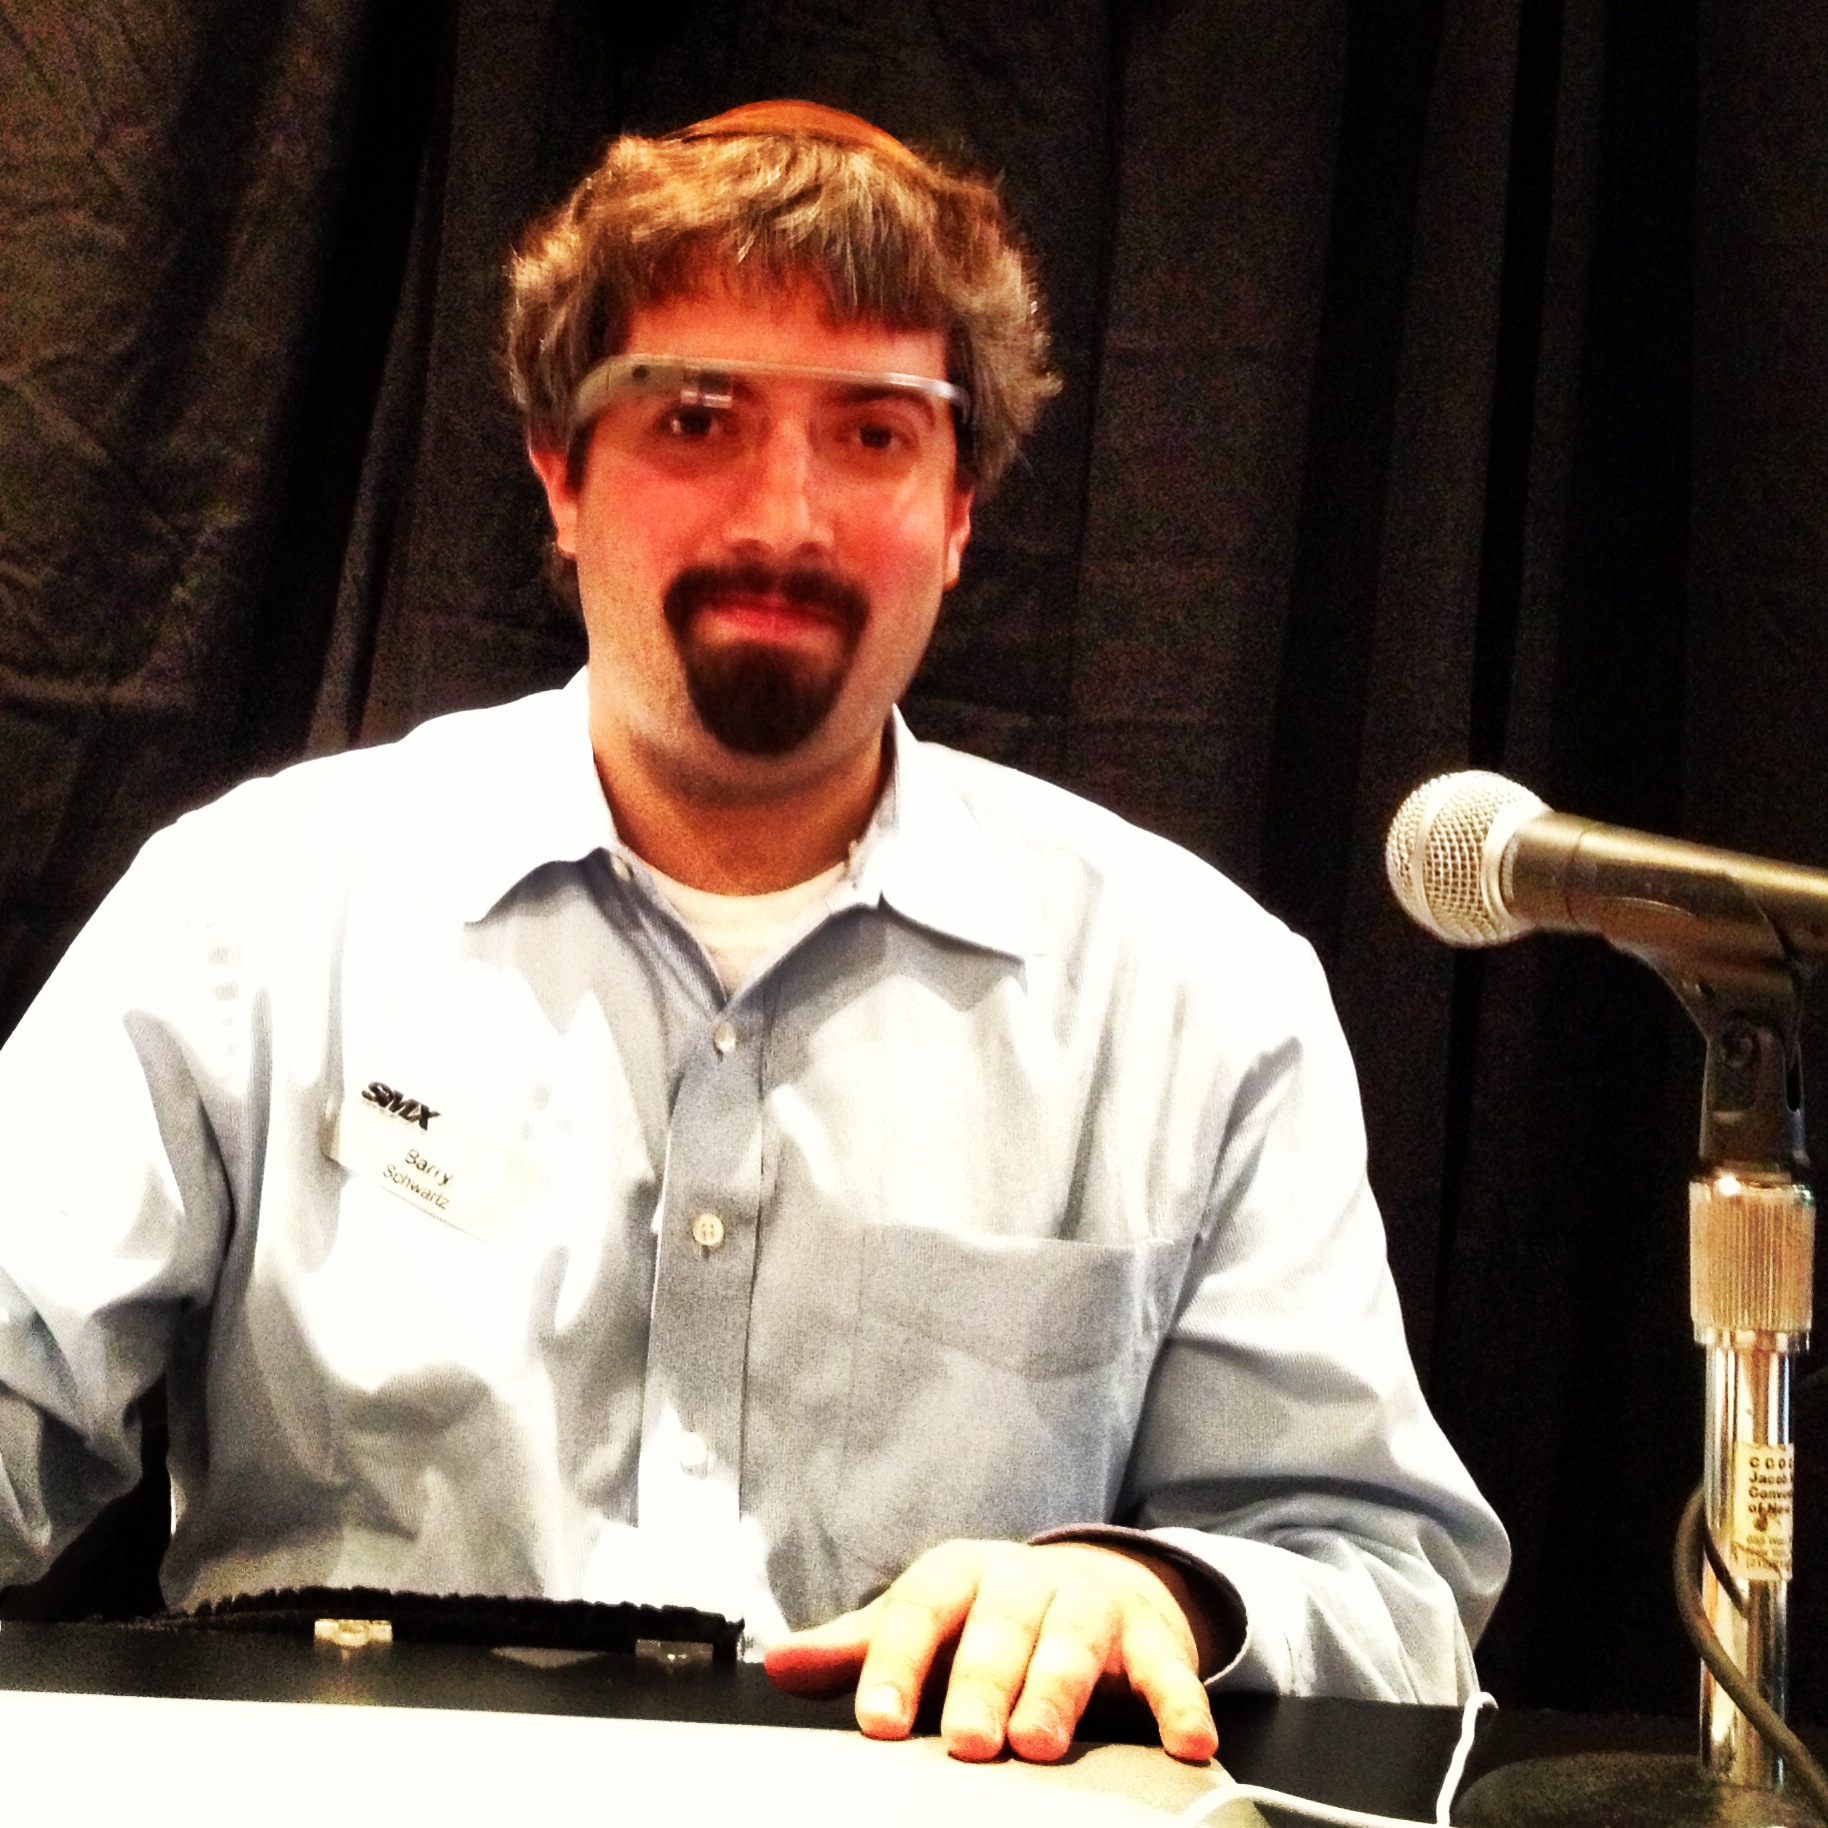 At SMX East, panelists including Barry Schwartz demonstrated Google Glass.